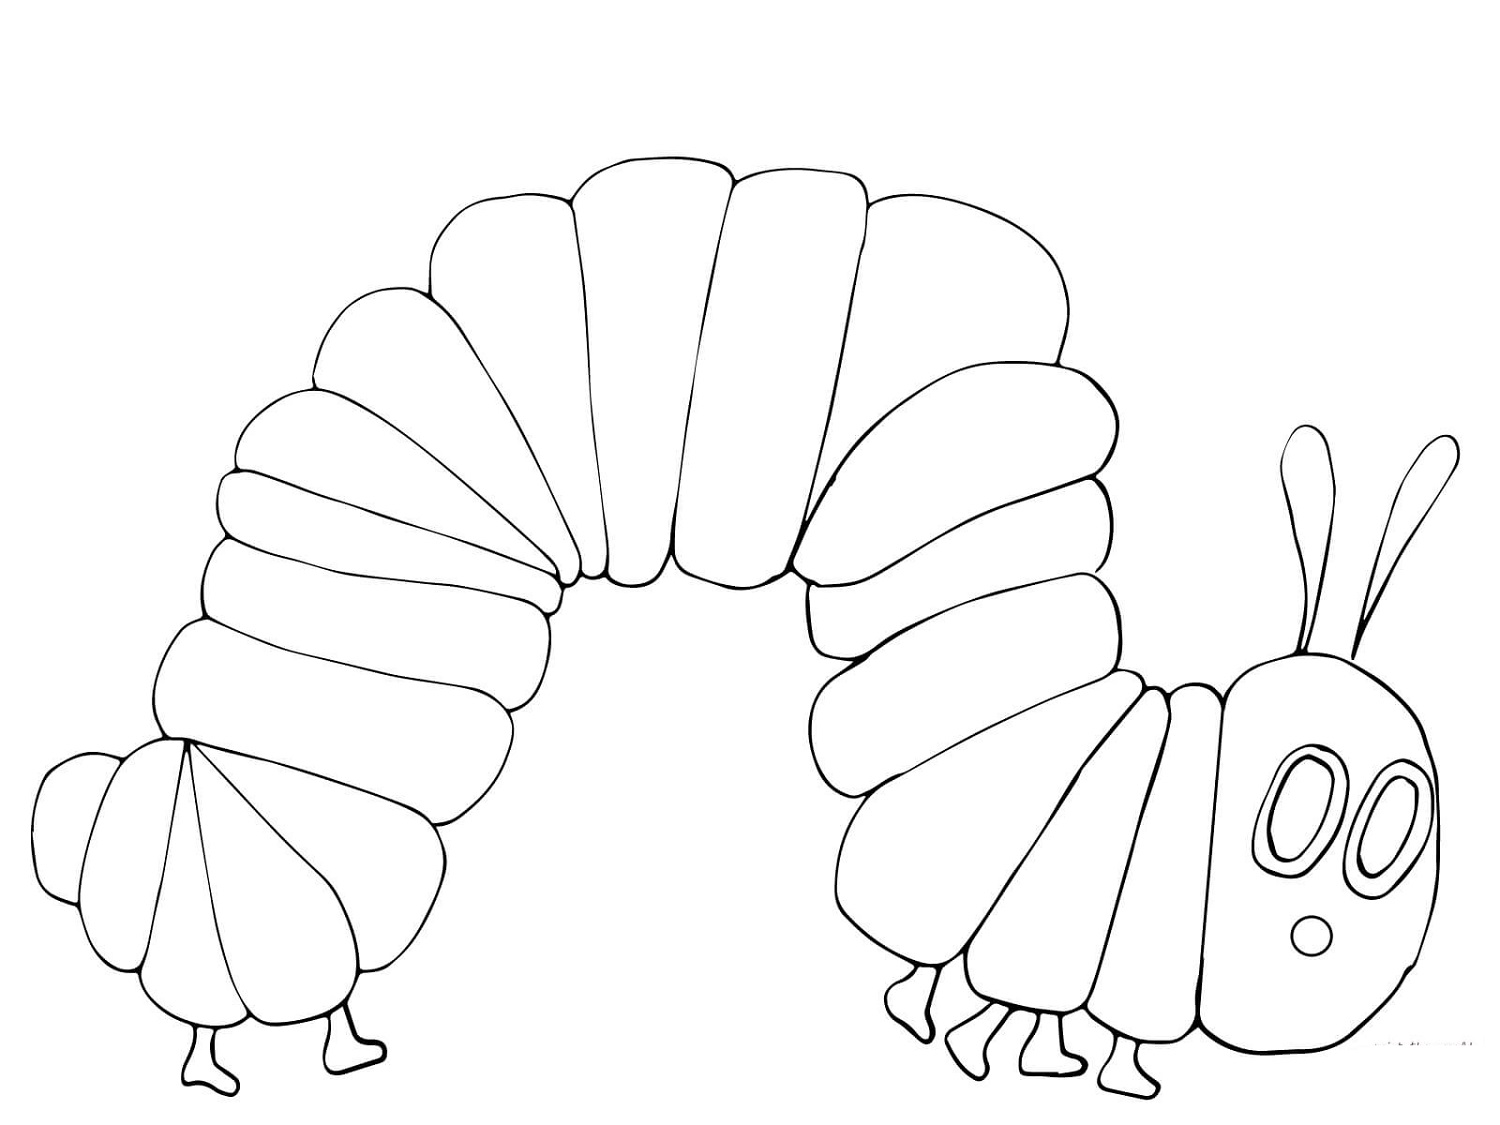 Hungry Caterpillar Coloring Page Pictures